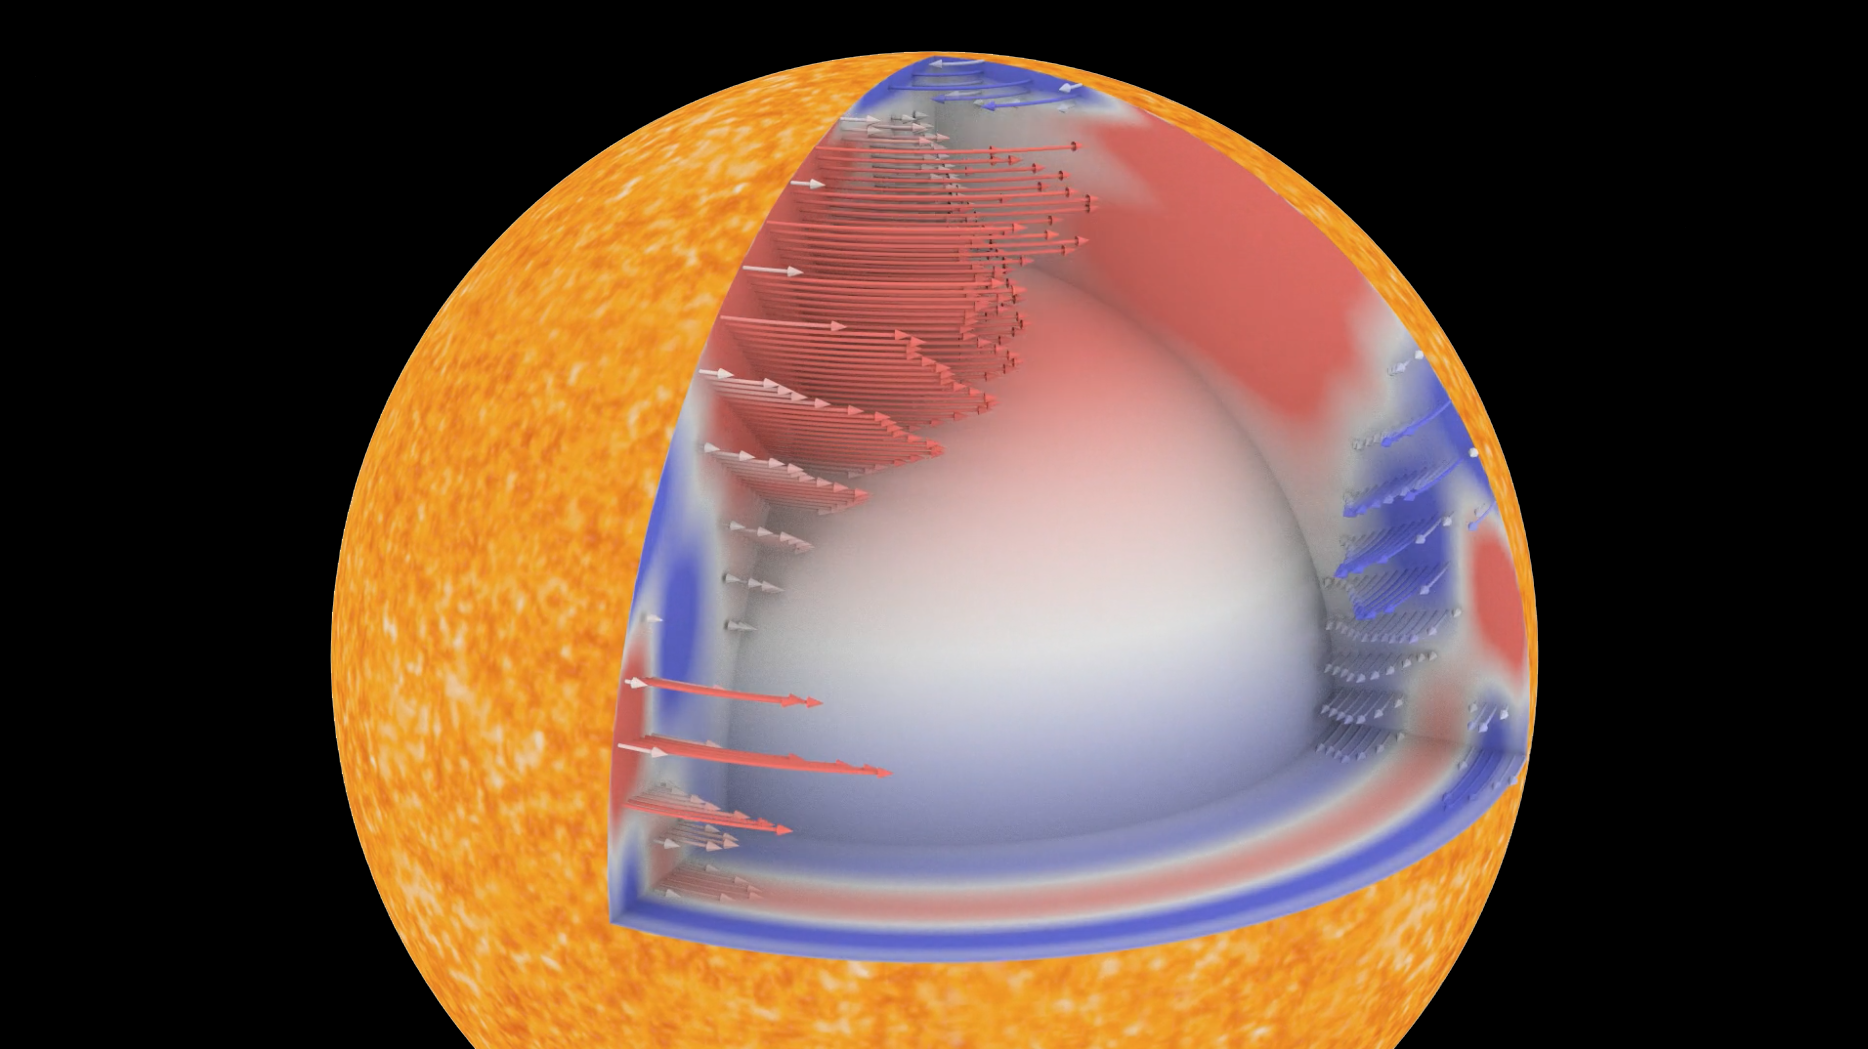 An illustrated graphic showing a cutaway of the sun against a black background.